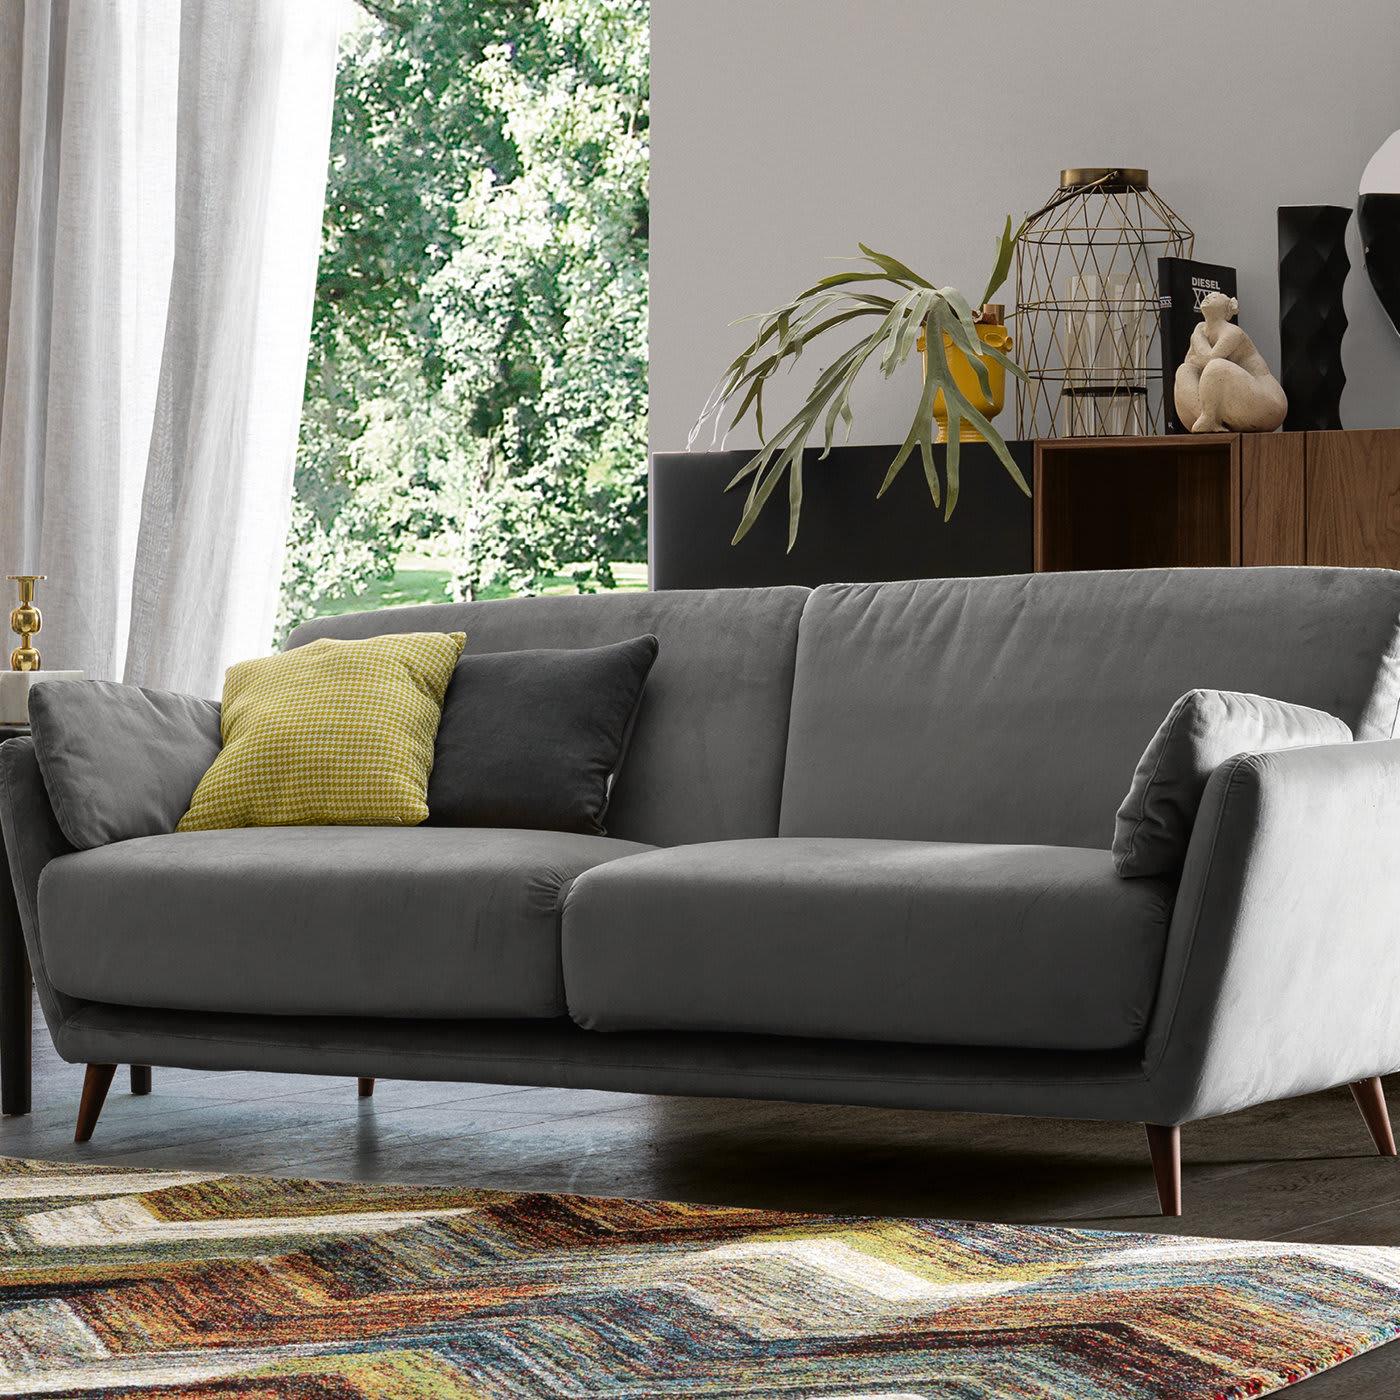 With hidden metal supports in its legs, the Domino 3-seater Sofa is surprisingly sturdy. Featuring flared midcentury modern-style legs, the sofa can be upholstered in the fabric of your choosing. Shown here with linen upholstery in Jeans and